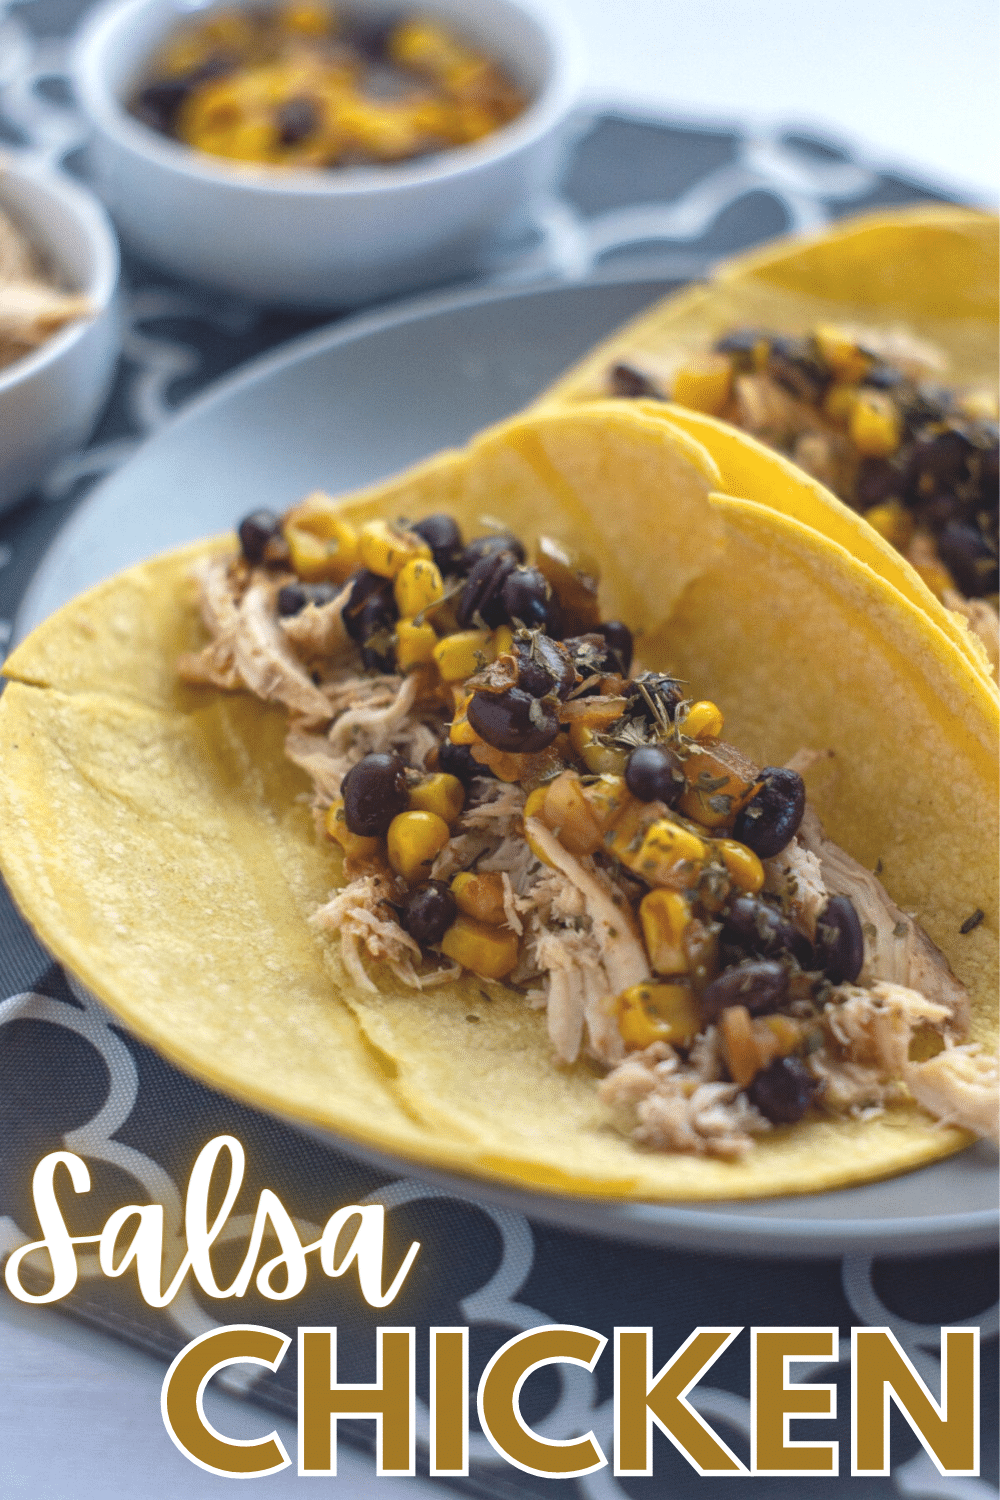 A vertical image of Salsa Chicken in tacos with title text at the bottom part reading "Salsa Chicken".